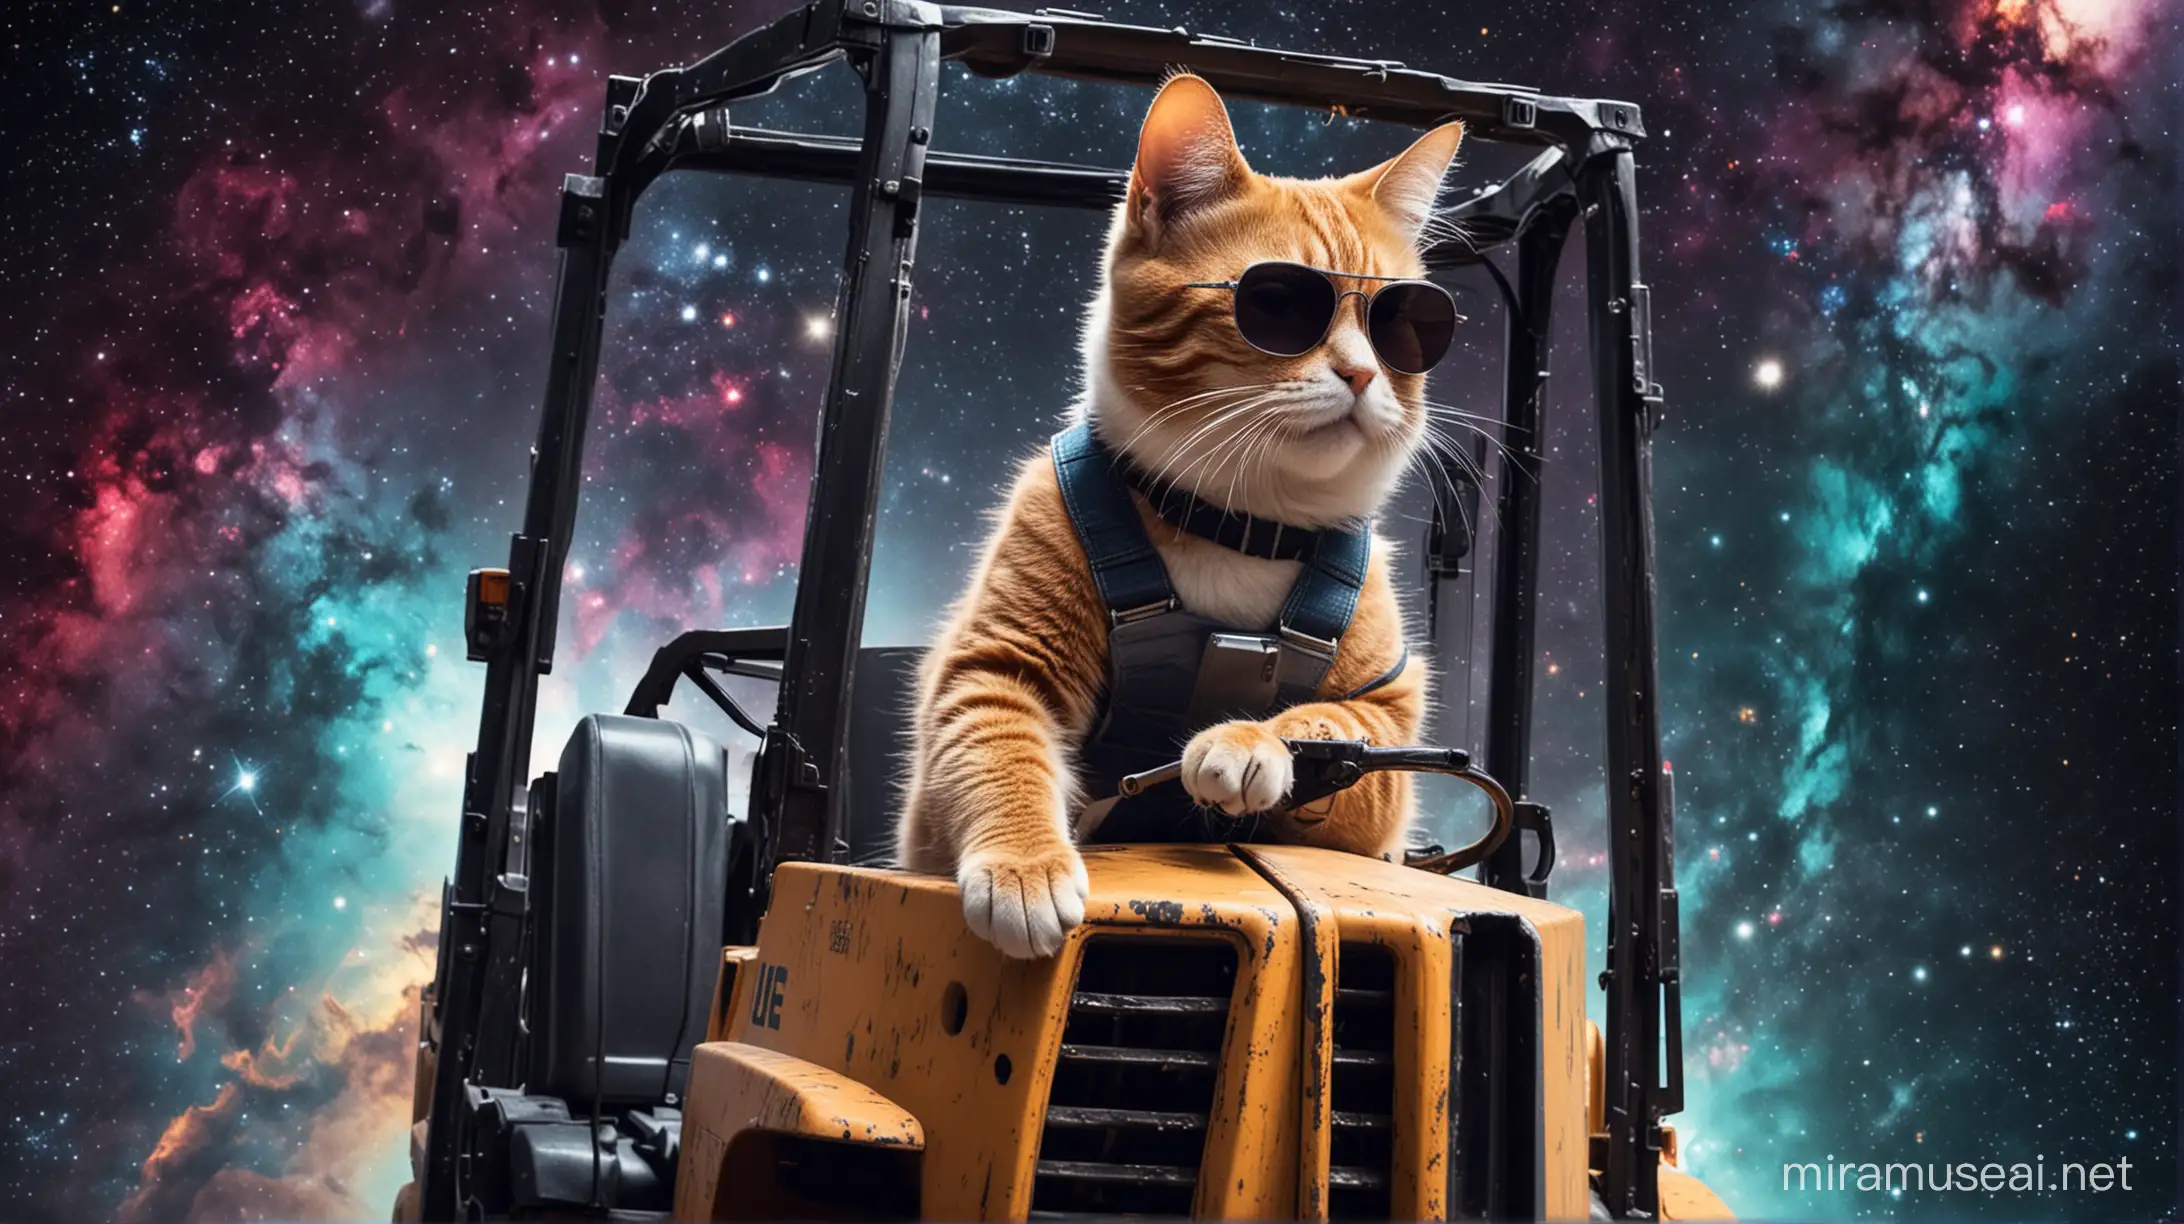 Space Cat Wearing Sunglasses Operating Forklift